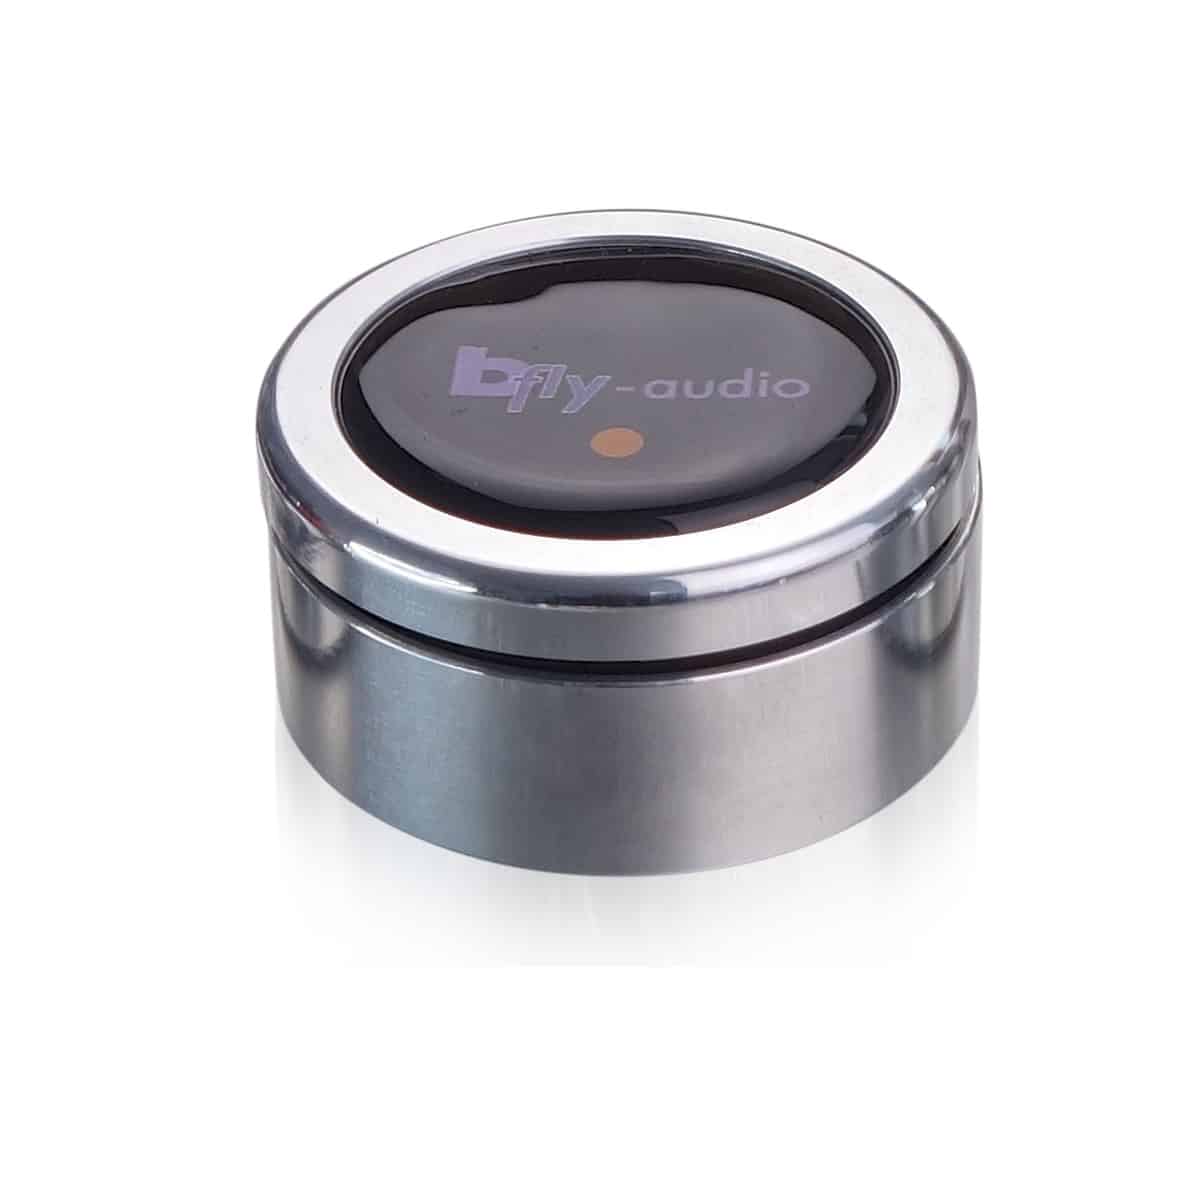 bfly-audio Absorber Pure 2